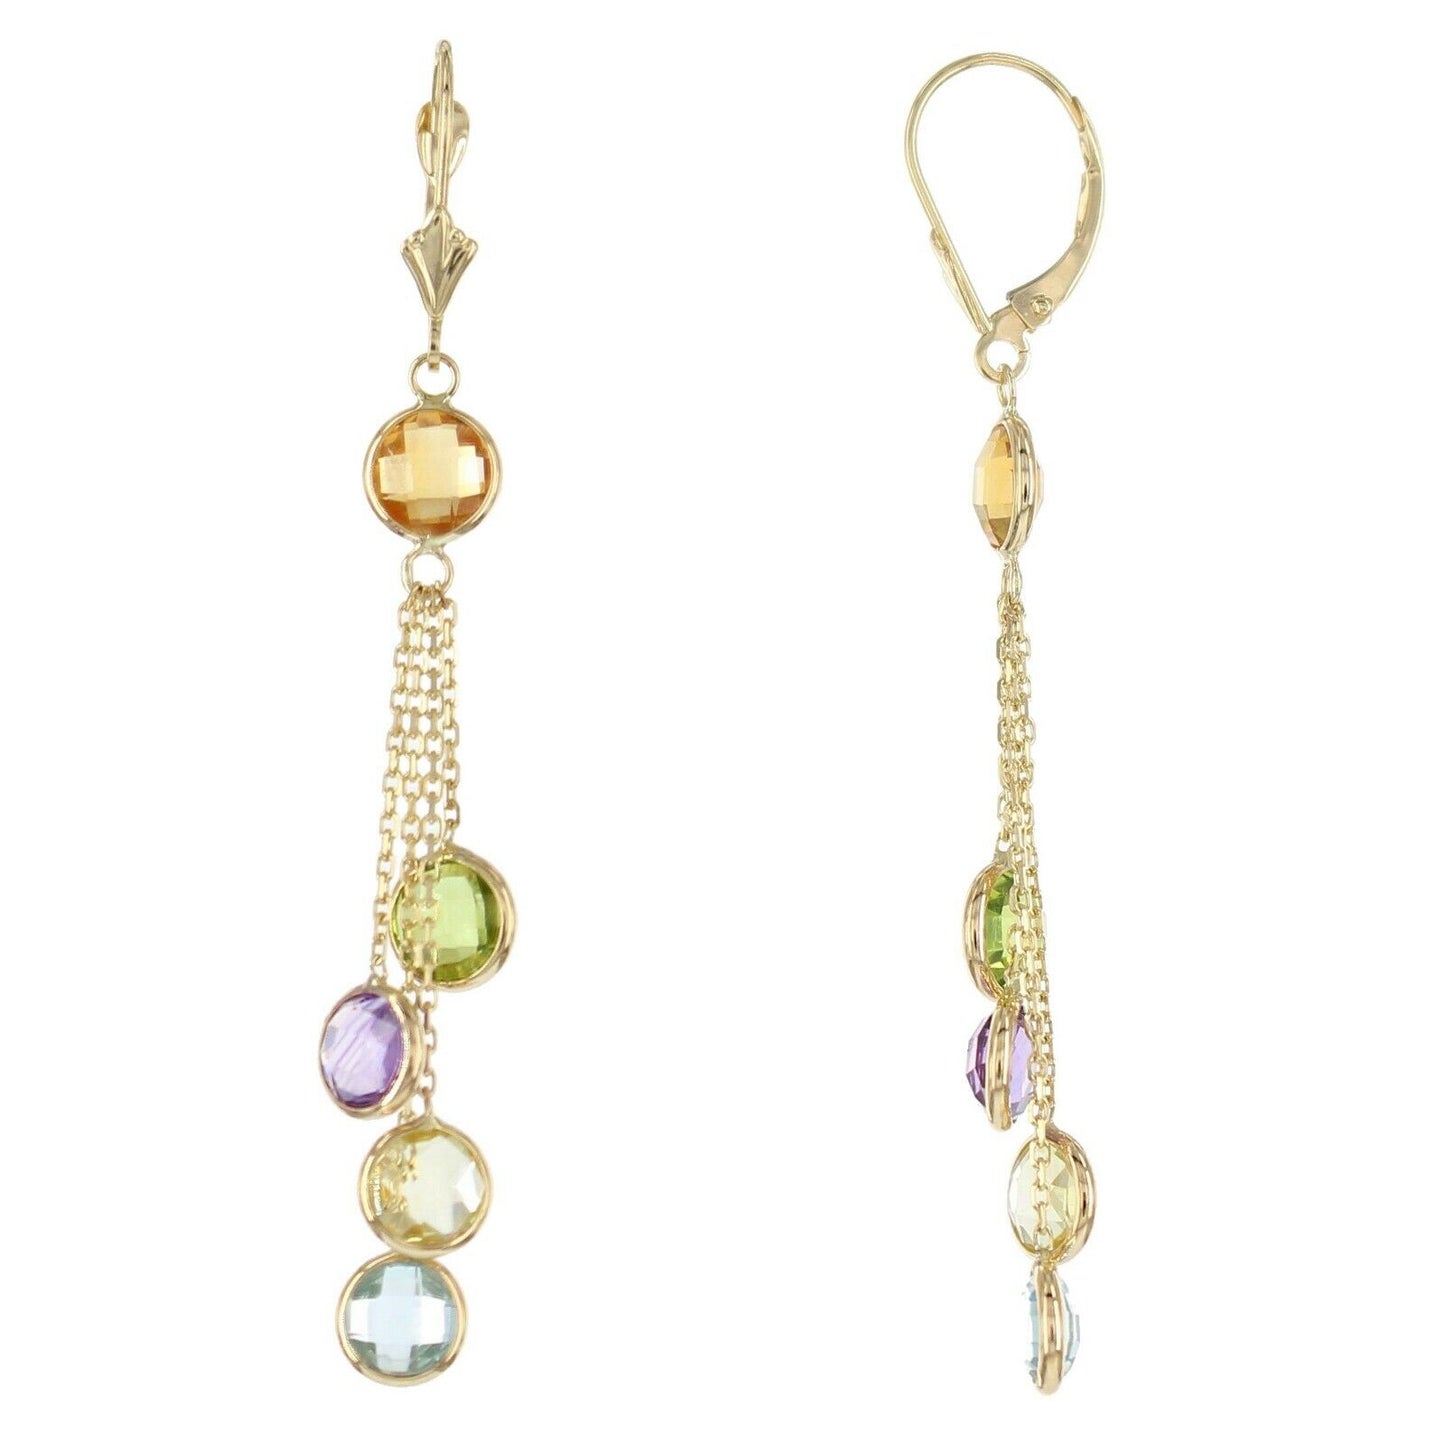 14k Yellow Gold Chandelier Earrings with Round Gemstones By The Yard